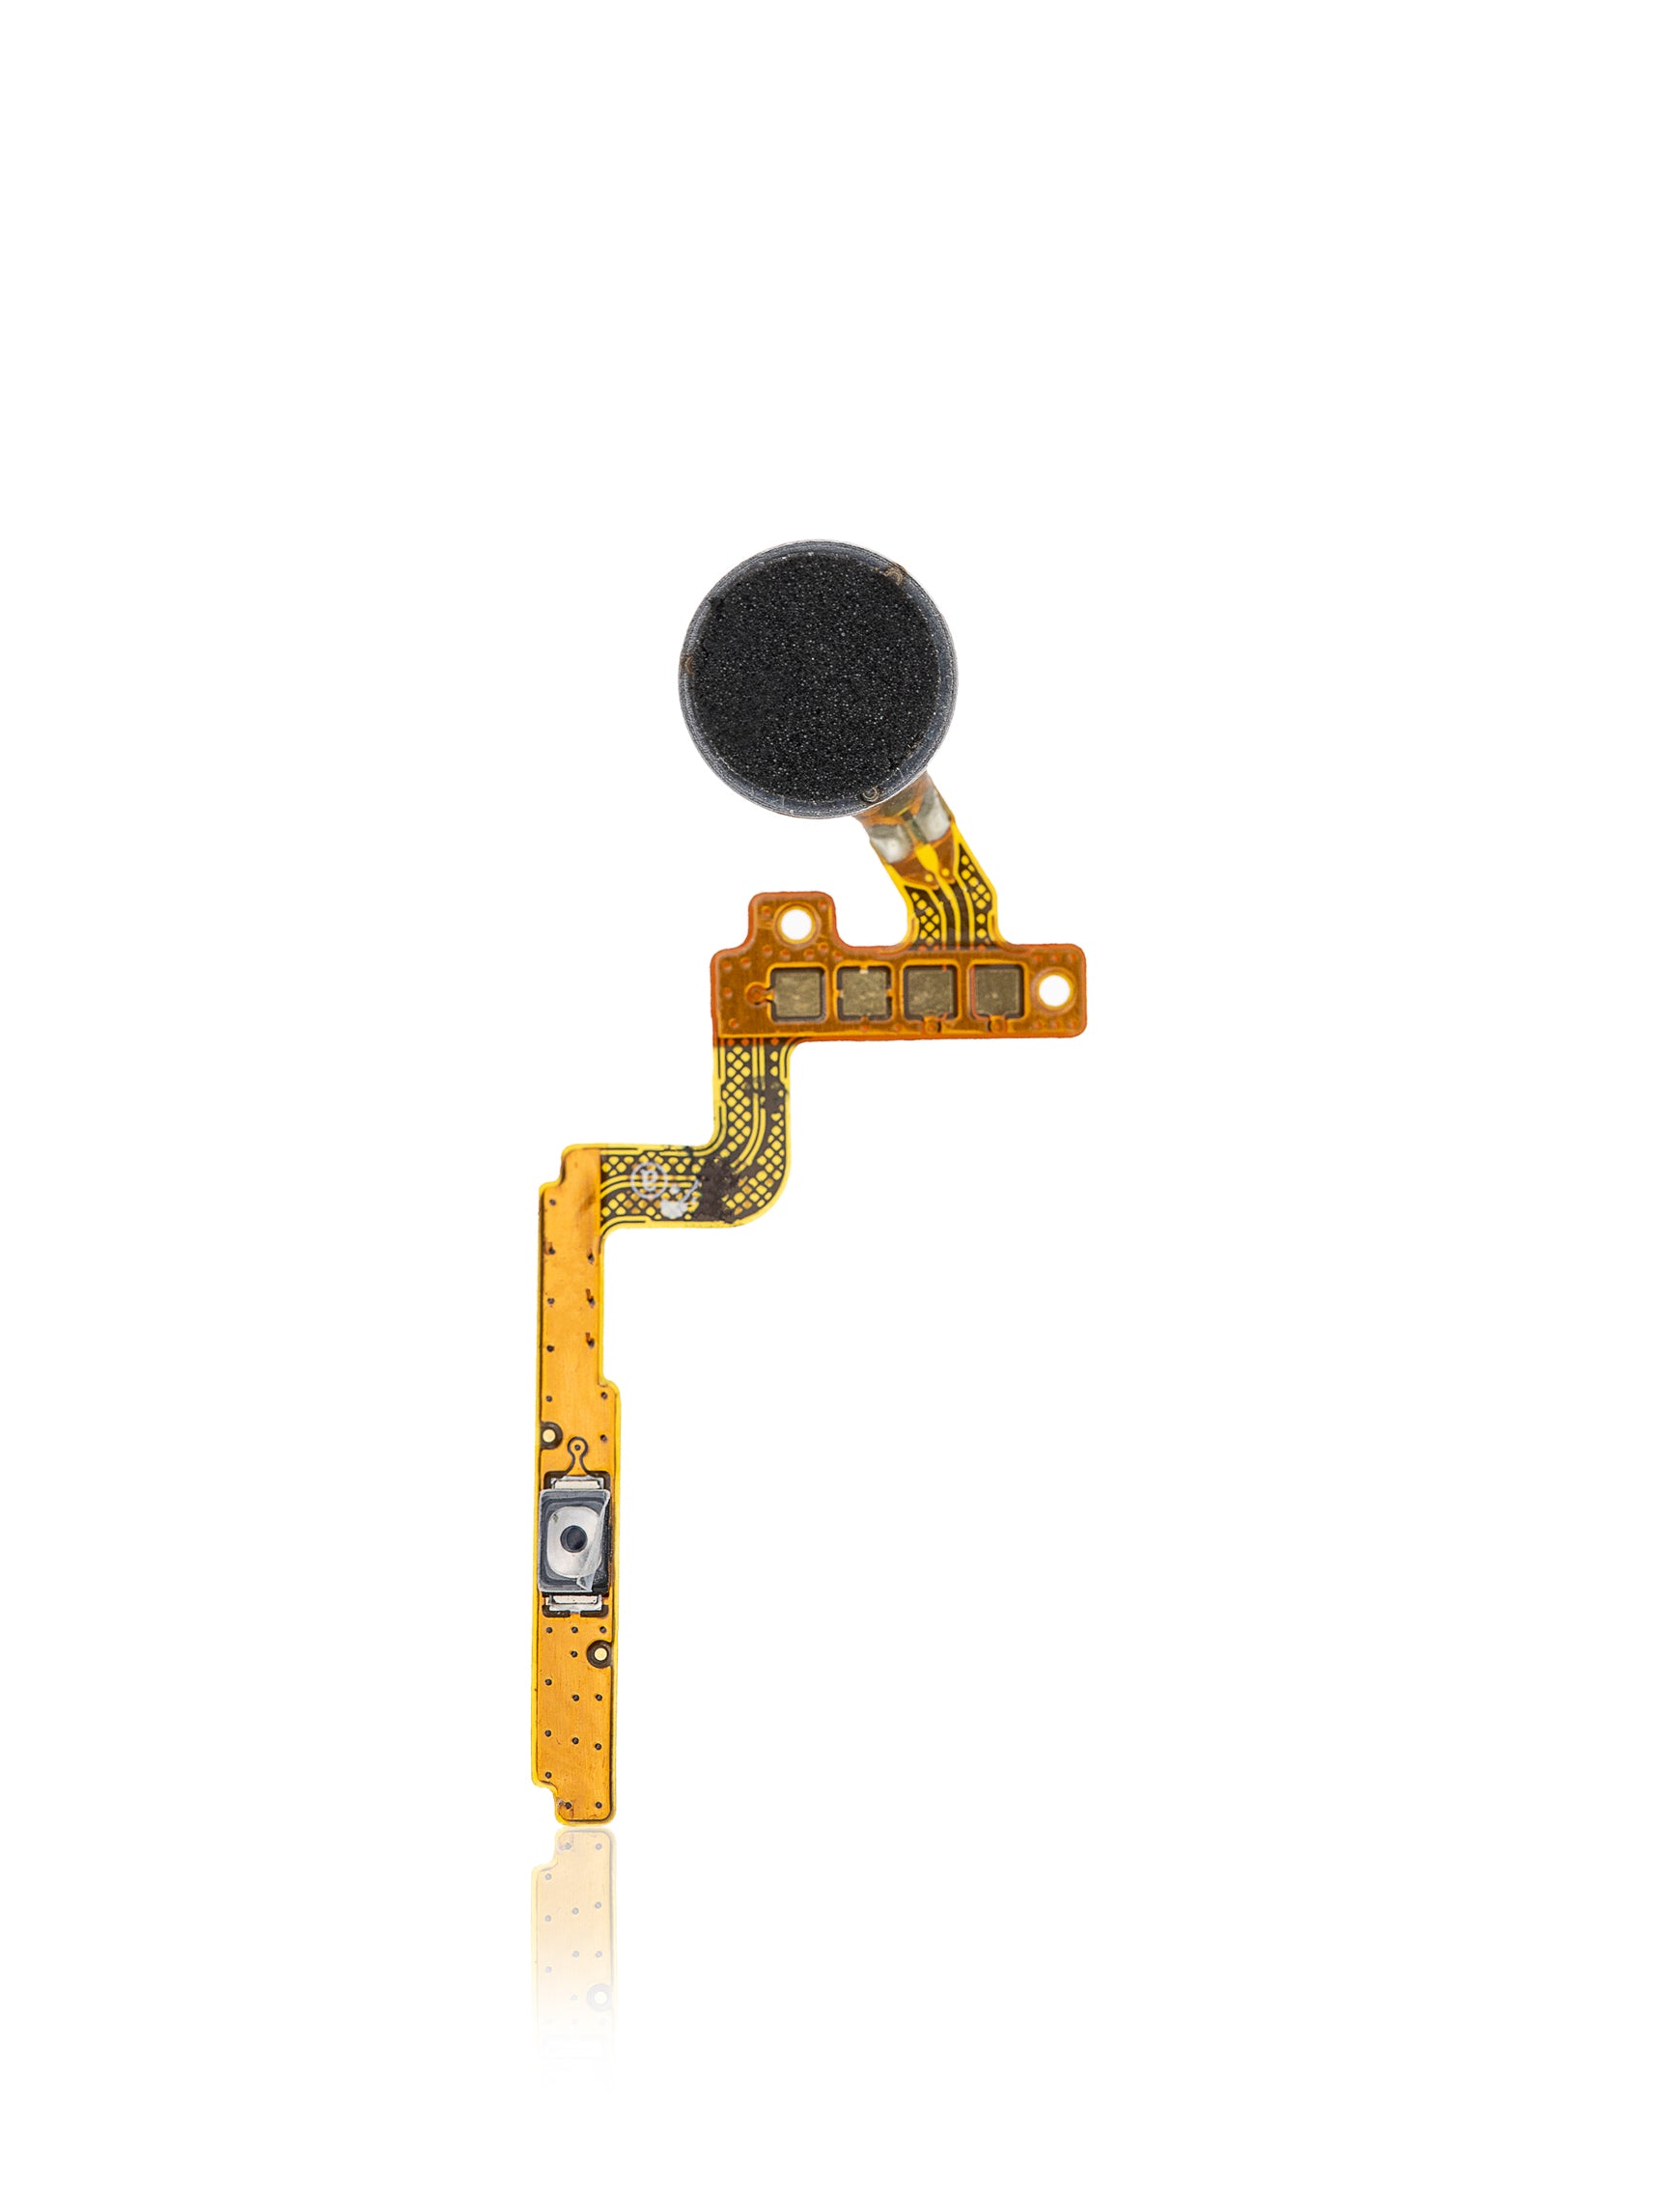 For Samsung Galaxy Note 4 Vibrator Motor / Power Button Flex Cable Replacement (N910V / Verizon)